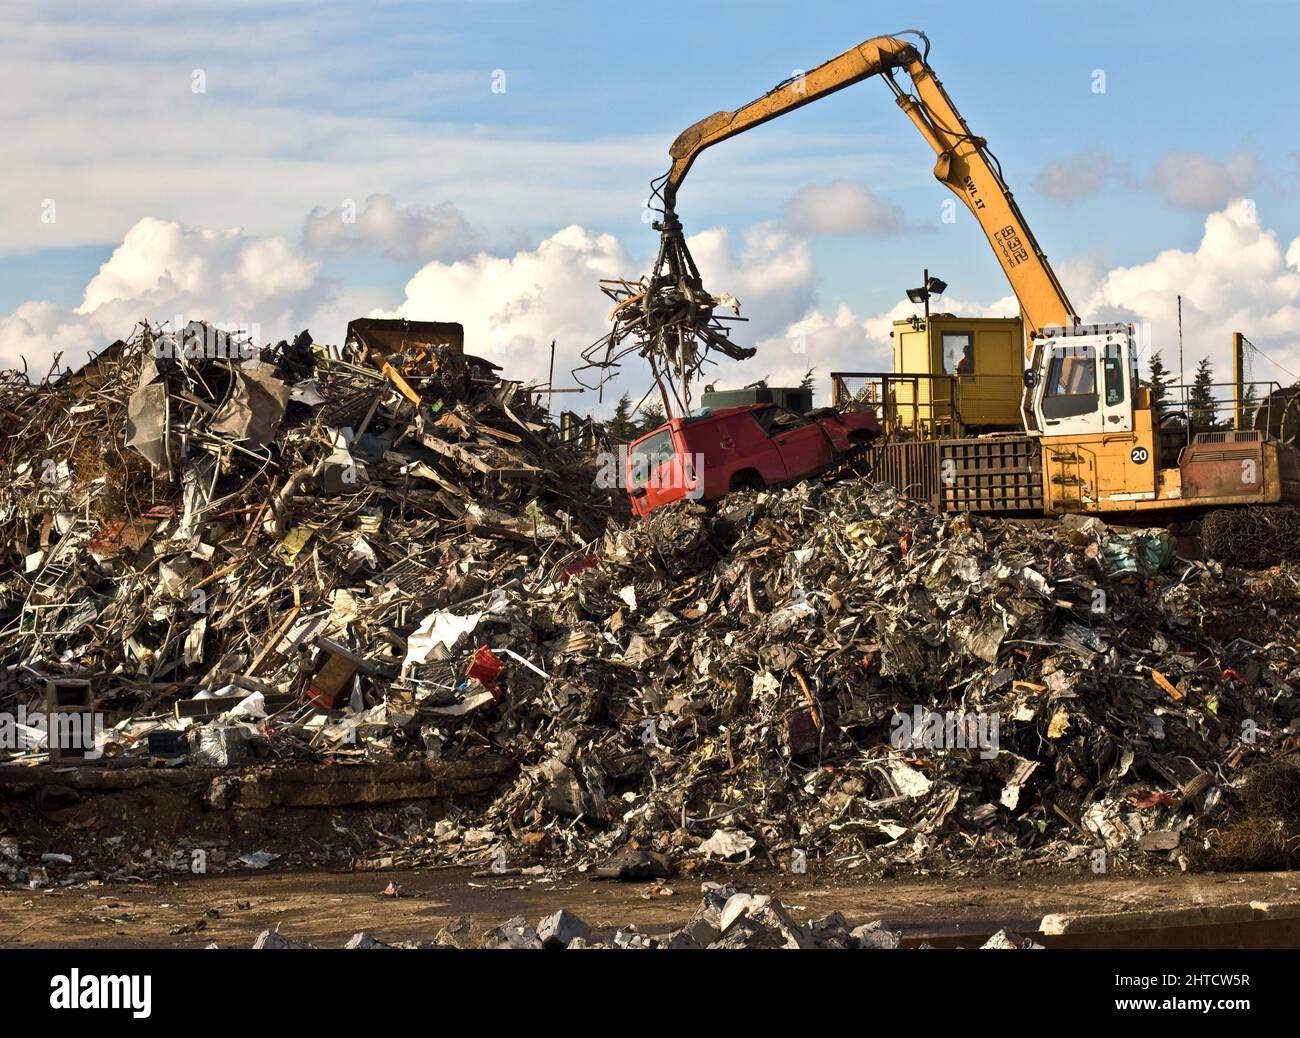 EMR Swindon Scrap Metal Yard, Gypsy Lane, Swindon, 2009. General view of the scrap yard, with a material handling machine at work on top of a pile of waste metal and scrapped vehicles. Stock Photo